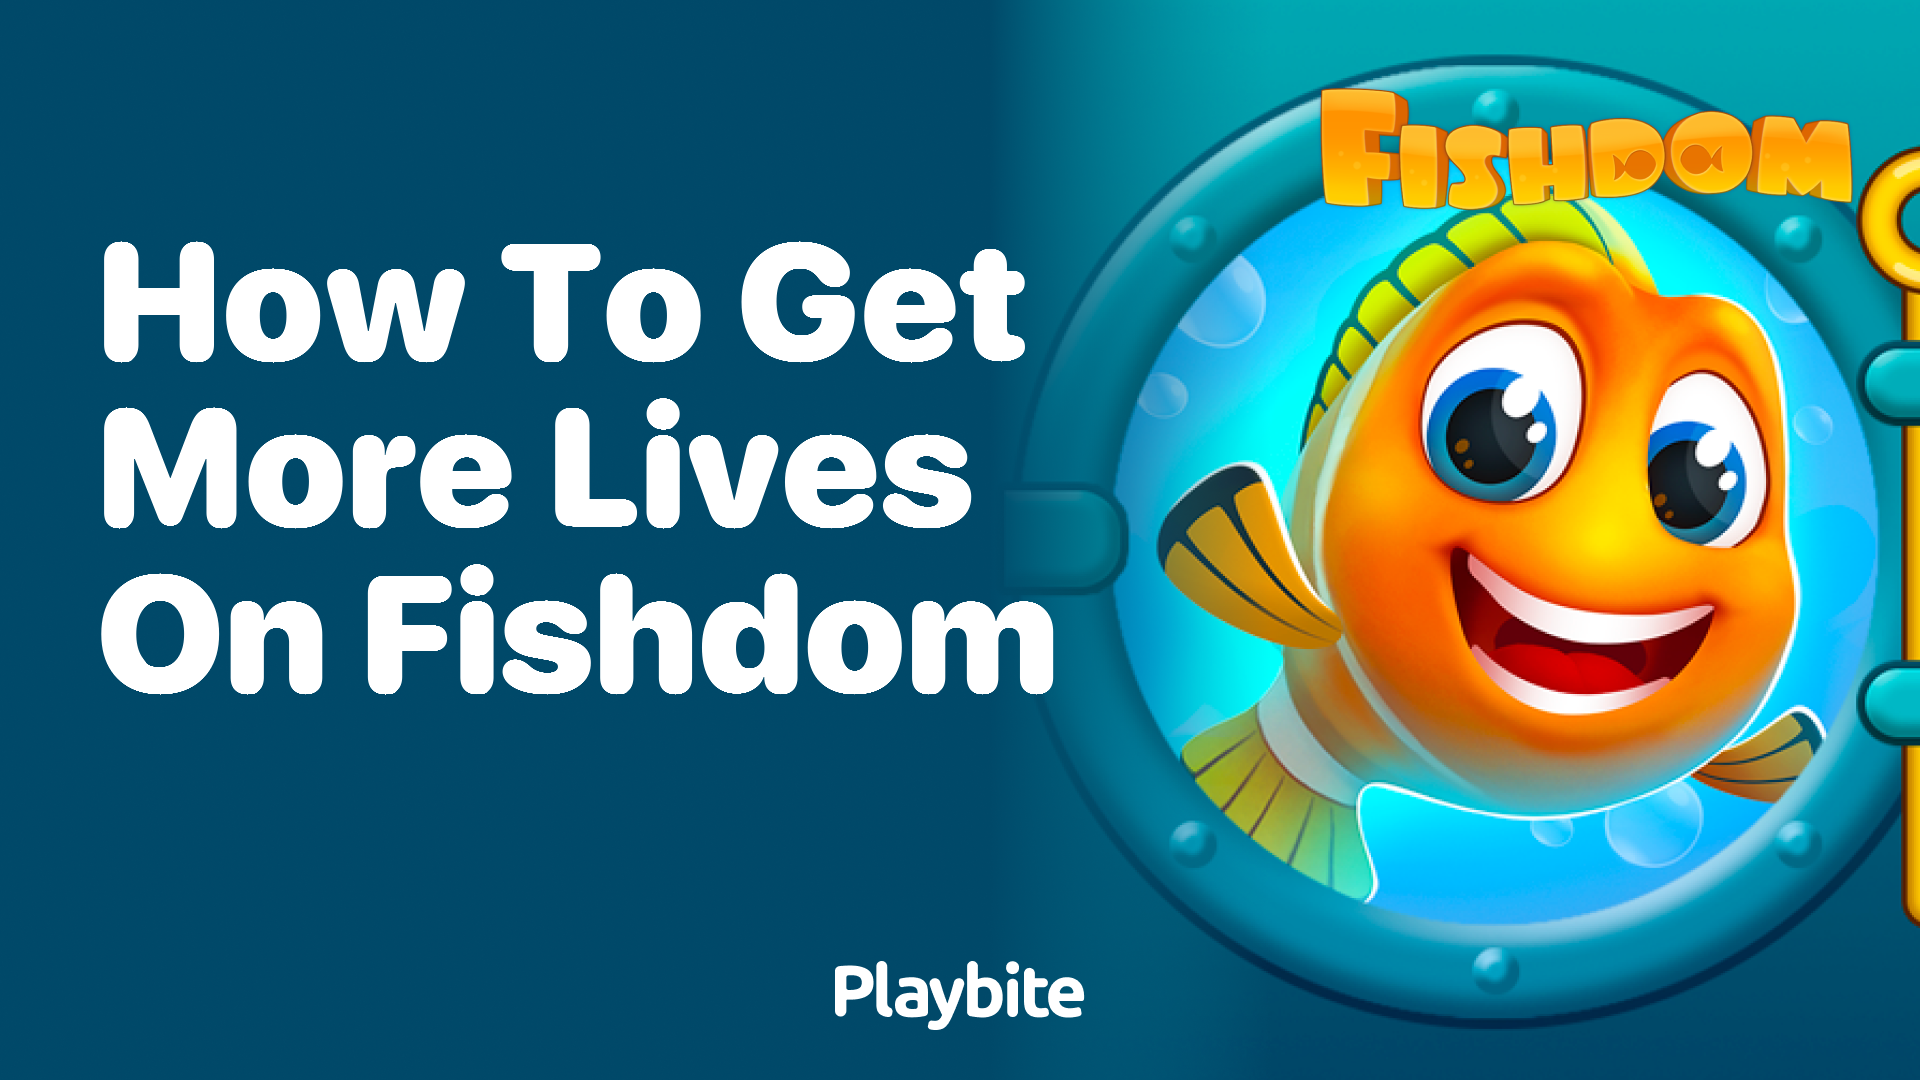 How to Get More Lives on Fishdom